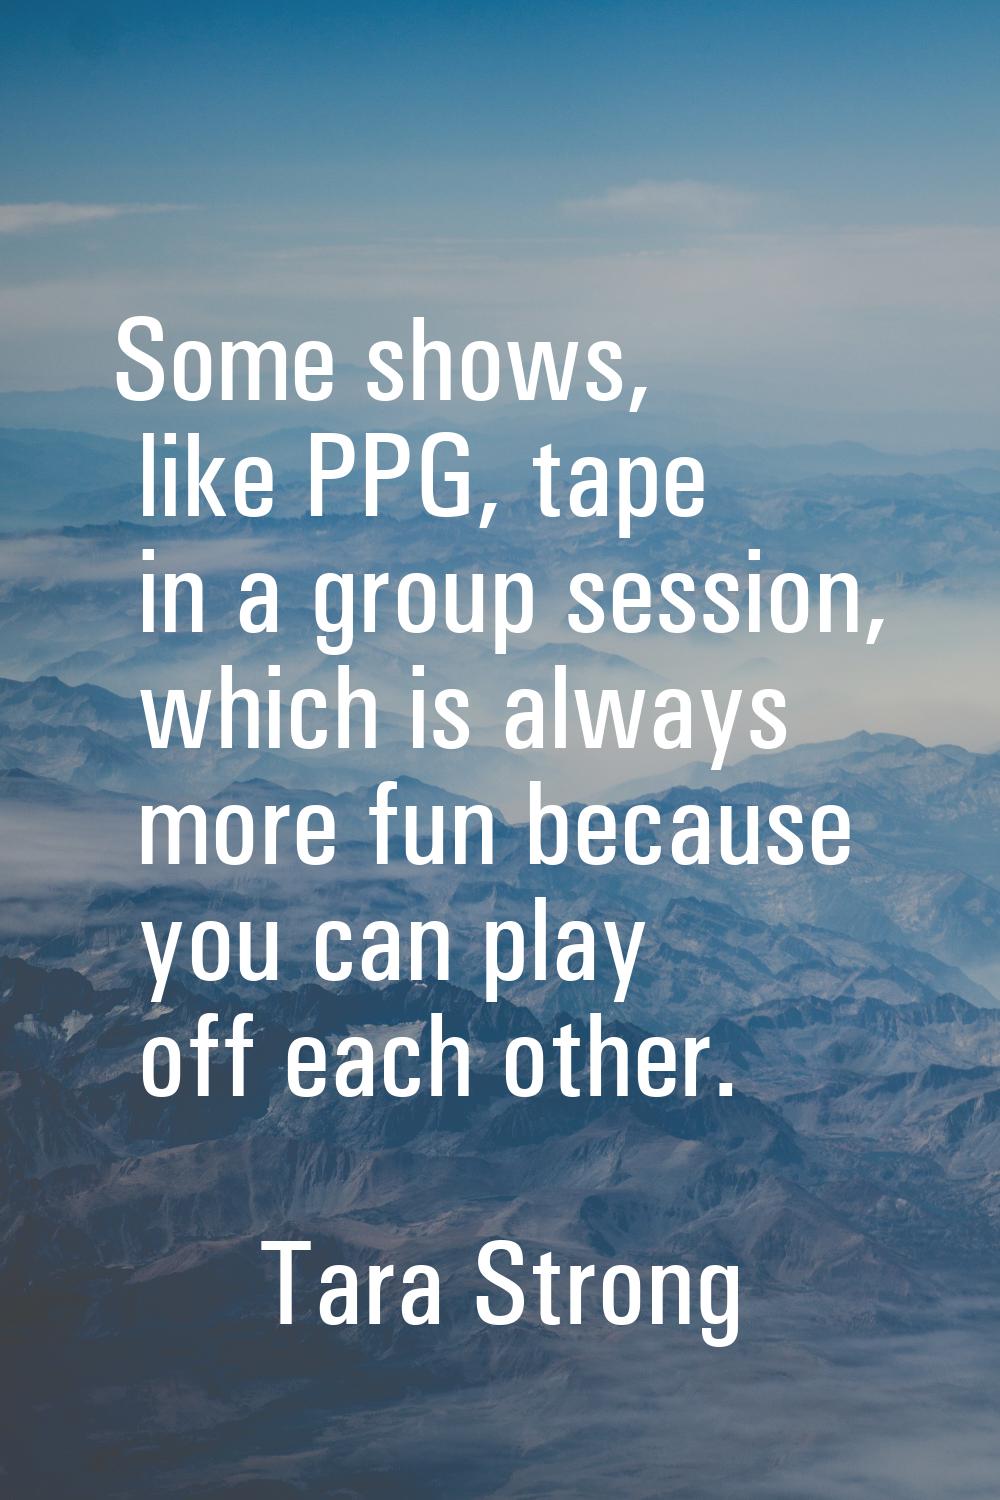 Some shows, like PPG, tape in a group session, which is always more fun because you can play off ea